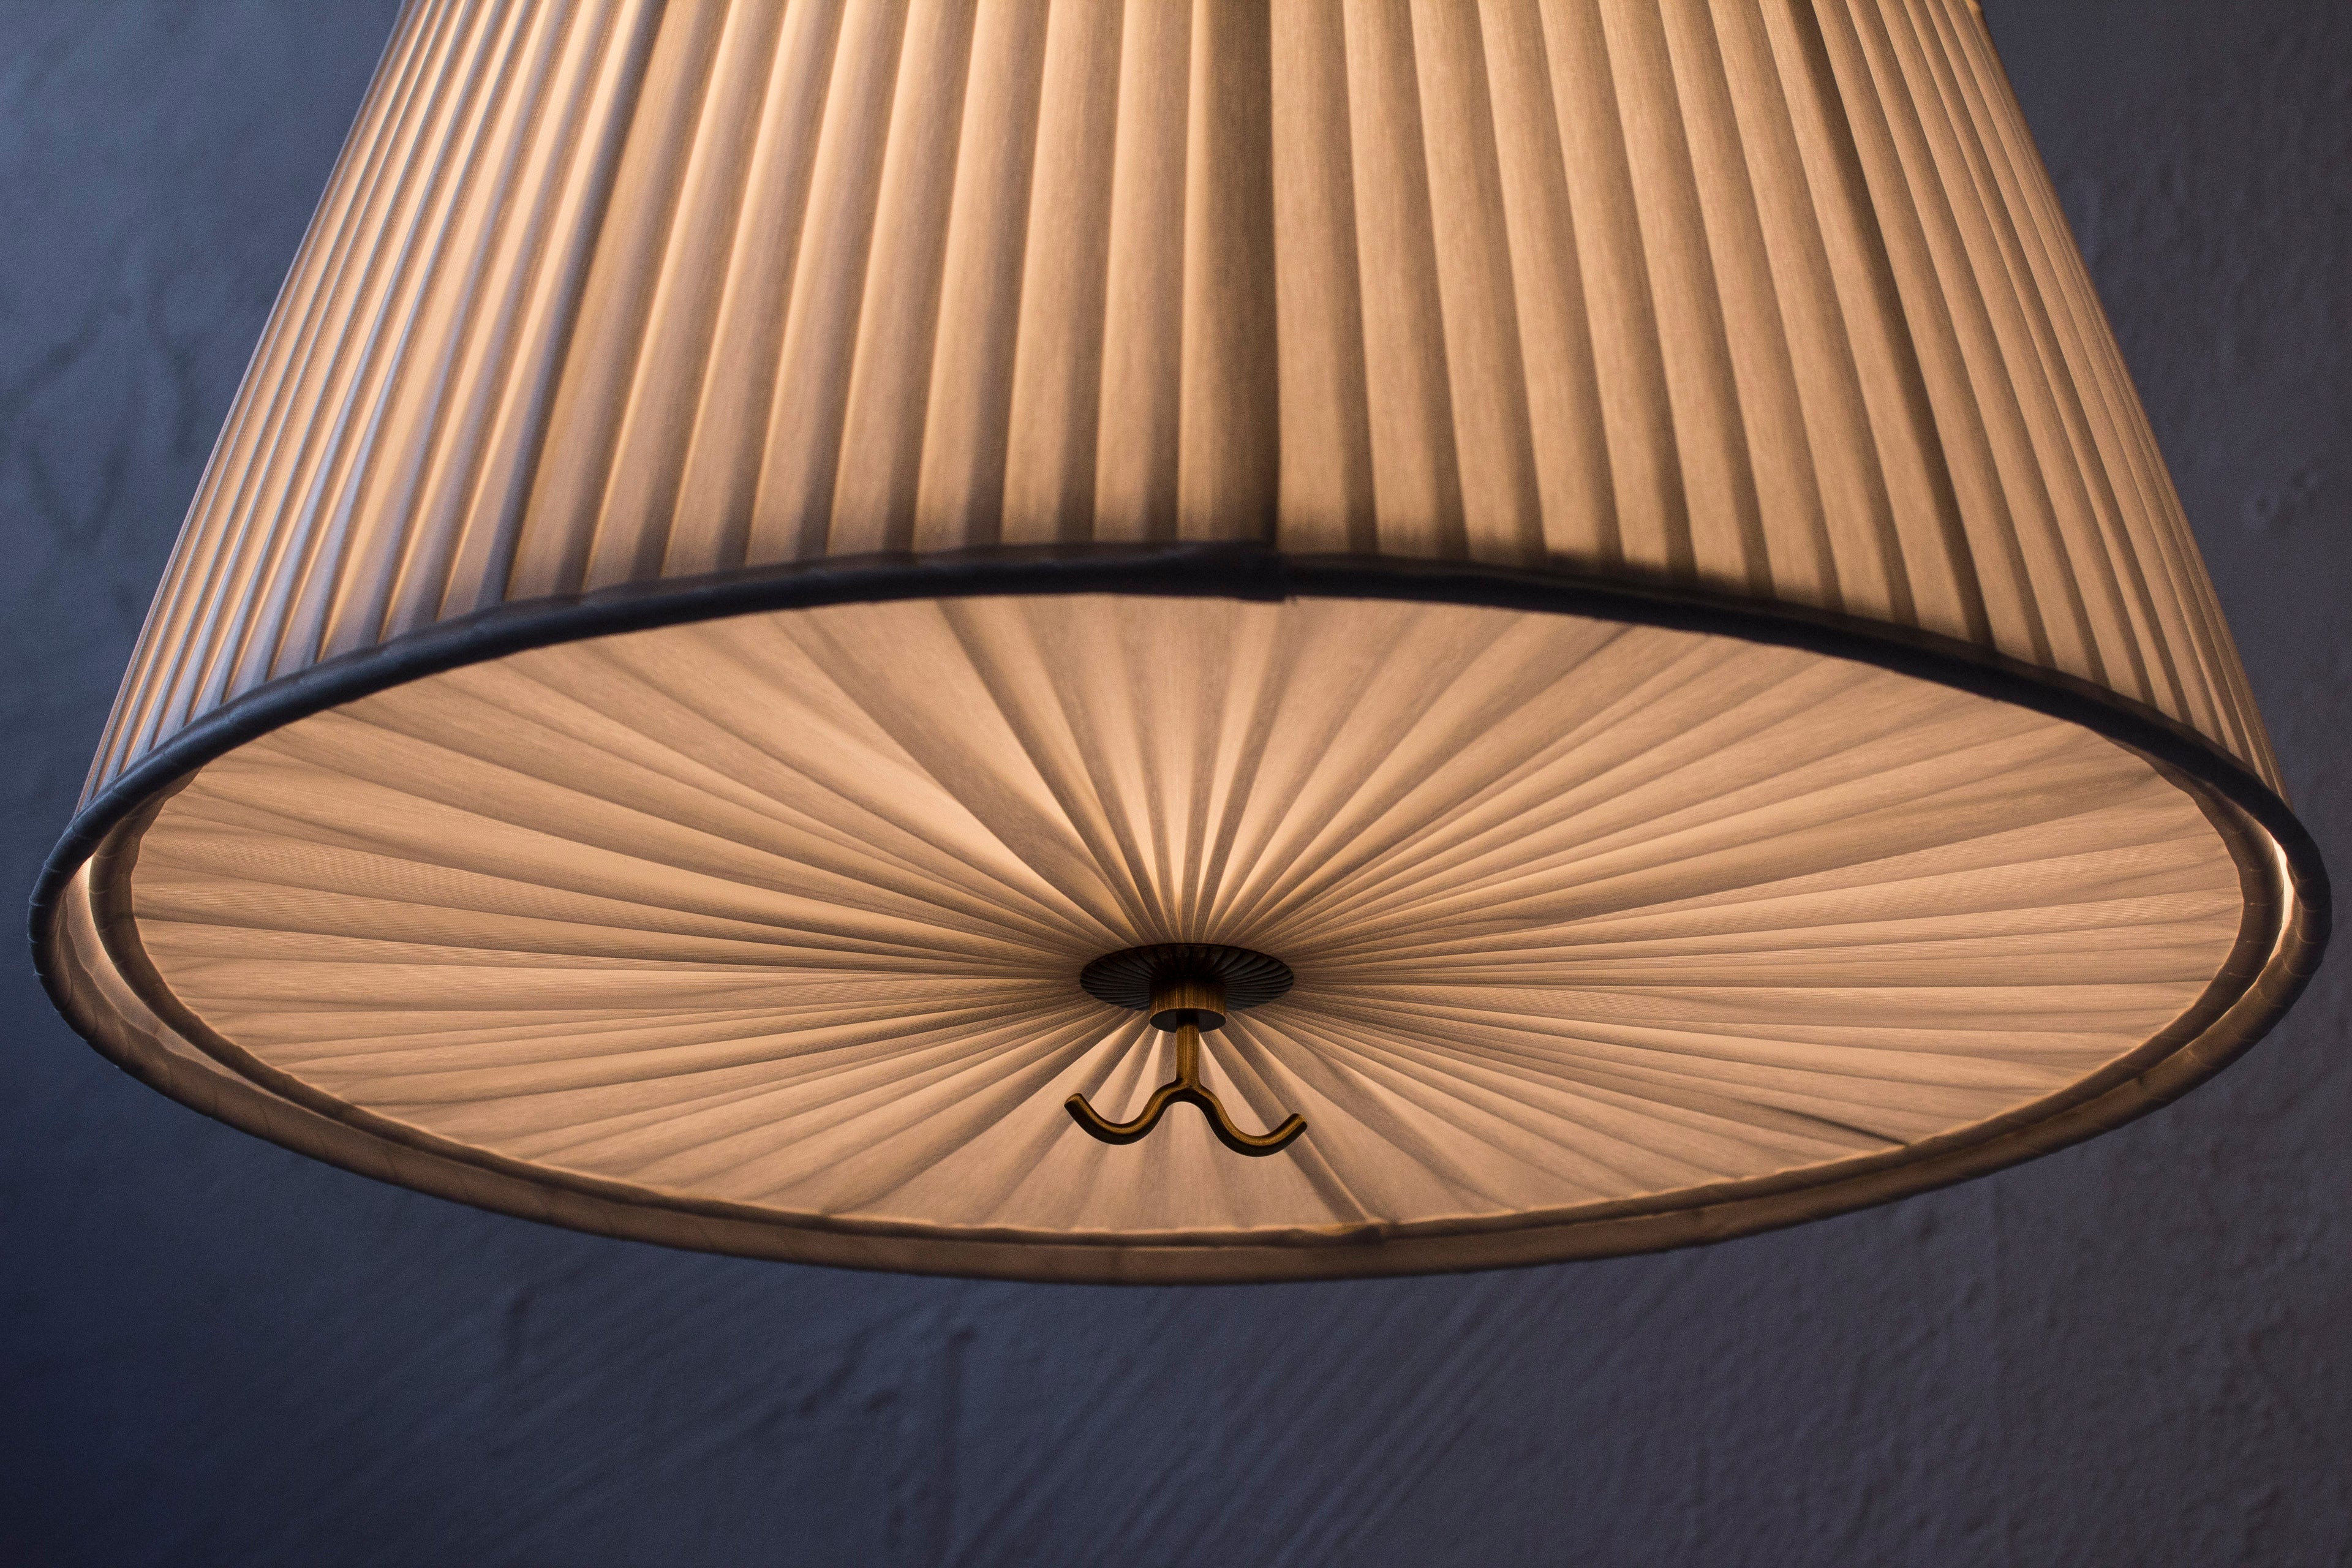 Ceiling lamp 11558 by Harald Notini